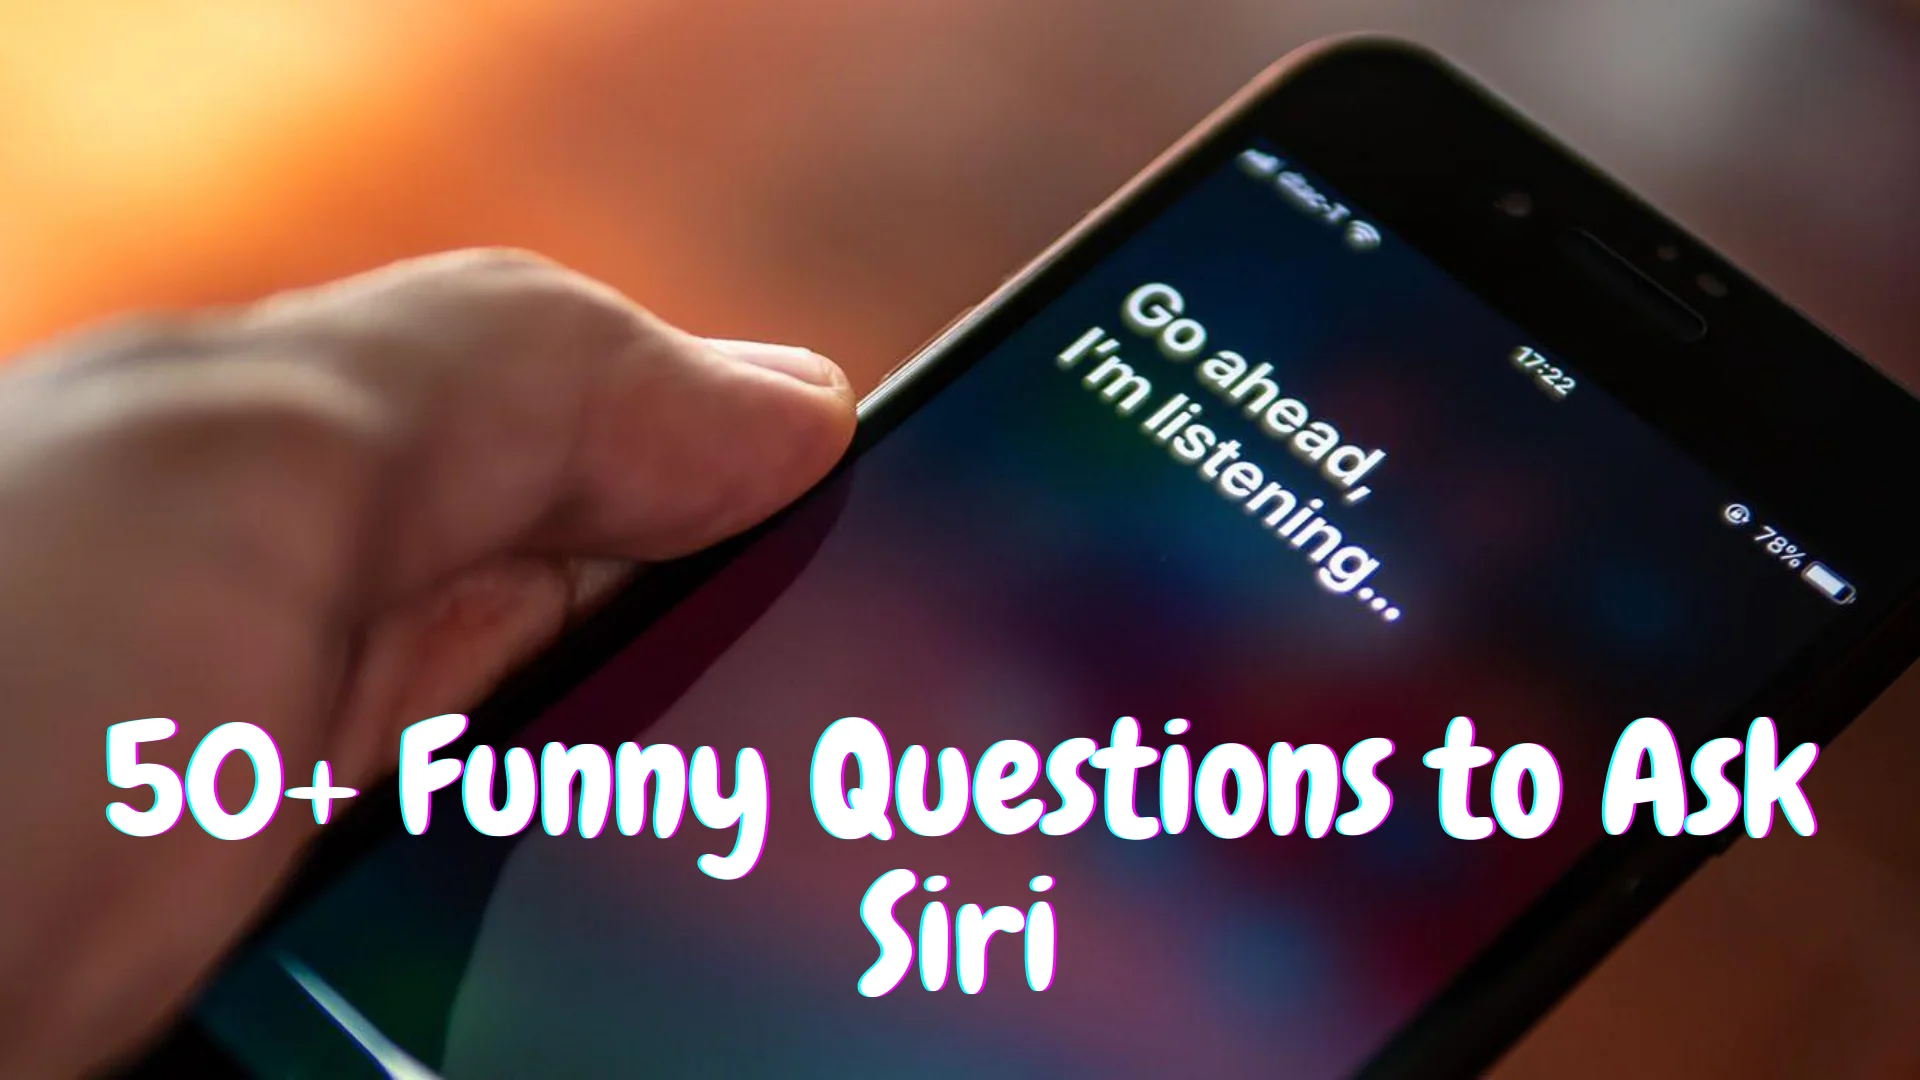 Funny Questions to Siri